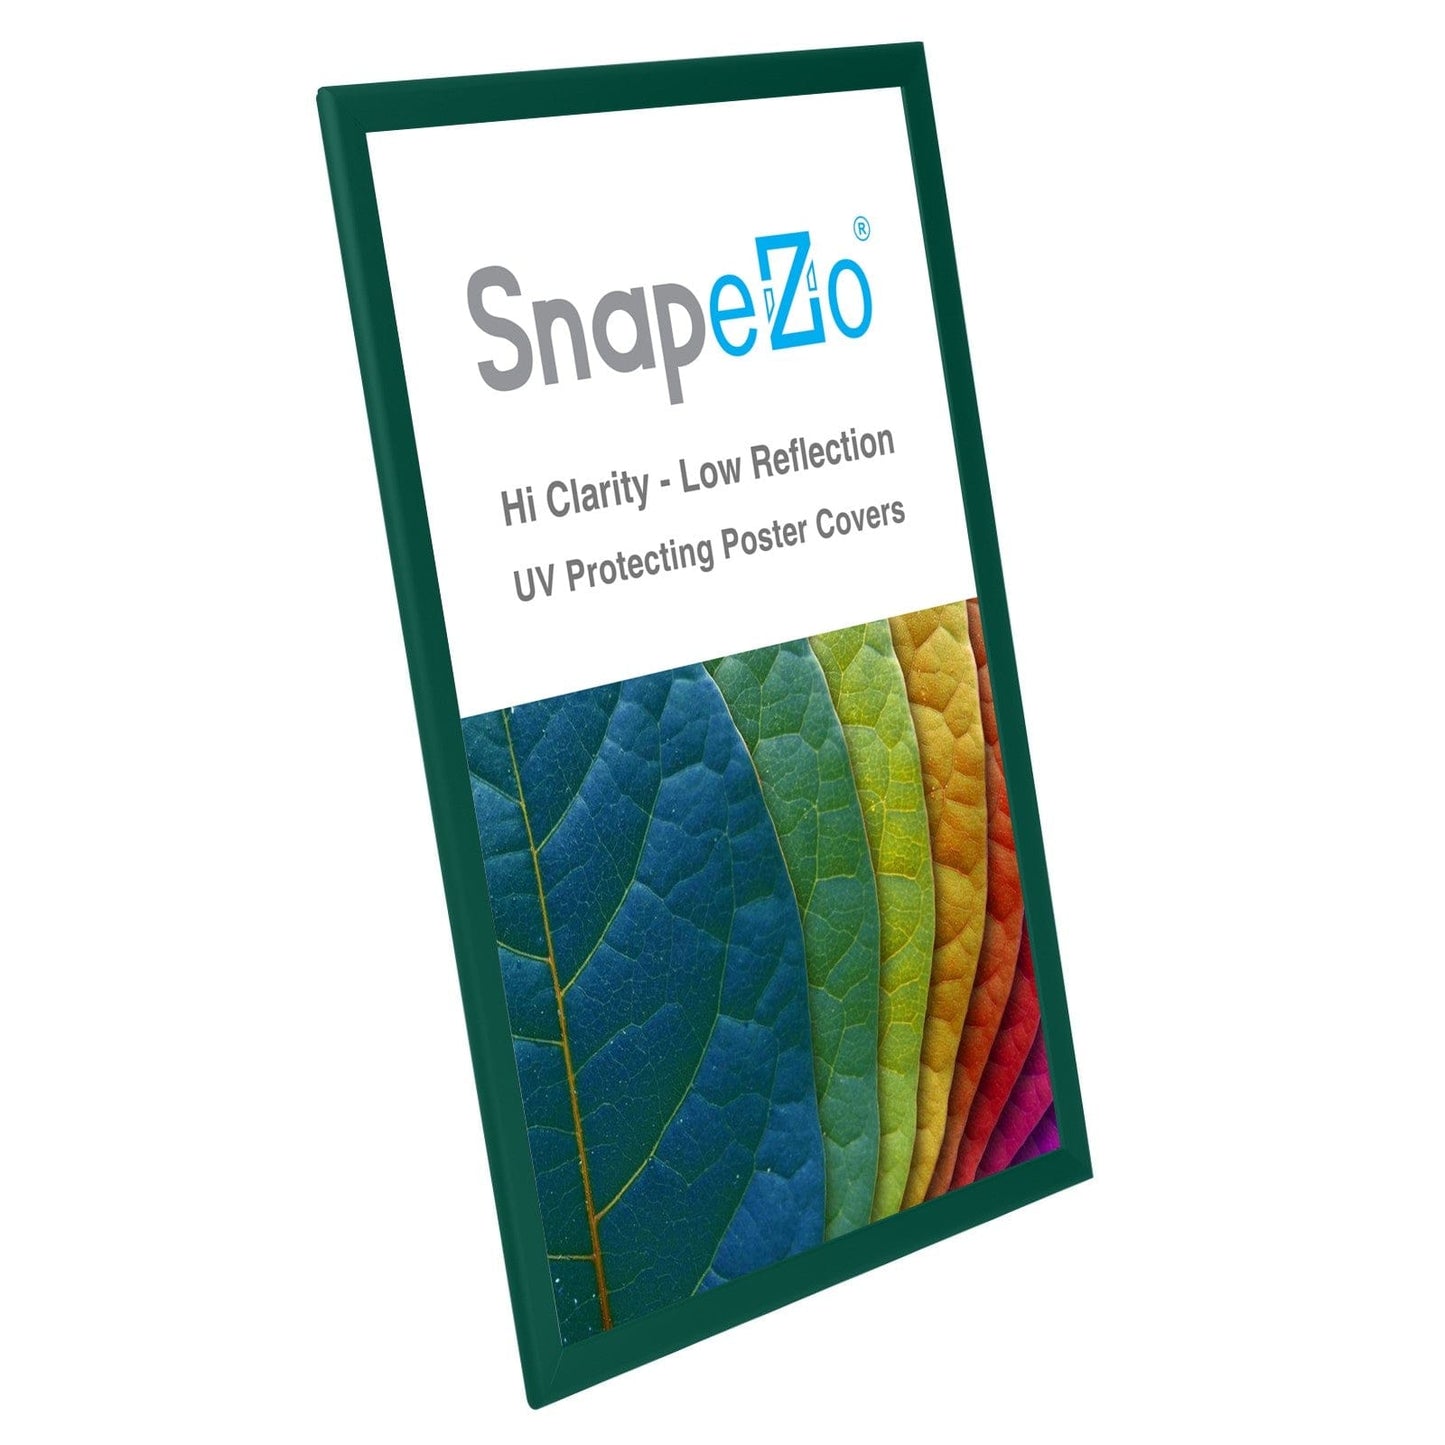 20x30 Inches Green SnapeZo® Snap Frame - 1.25" profile - Snap Frames Direct